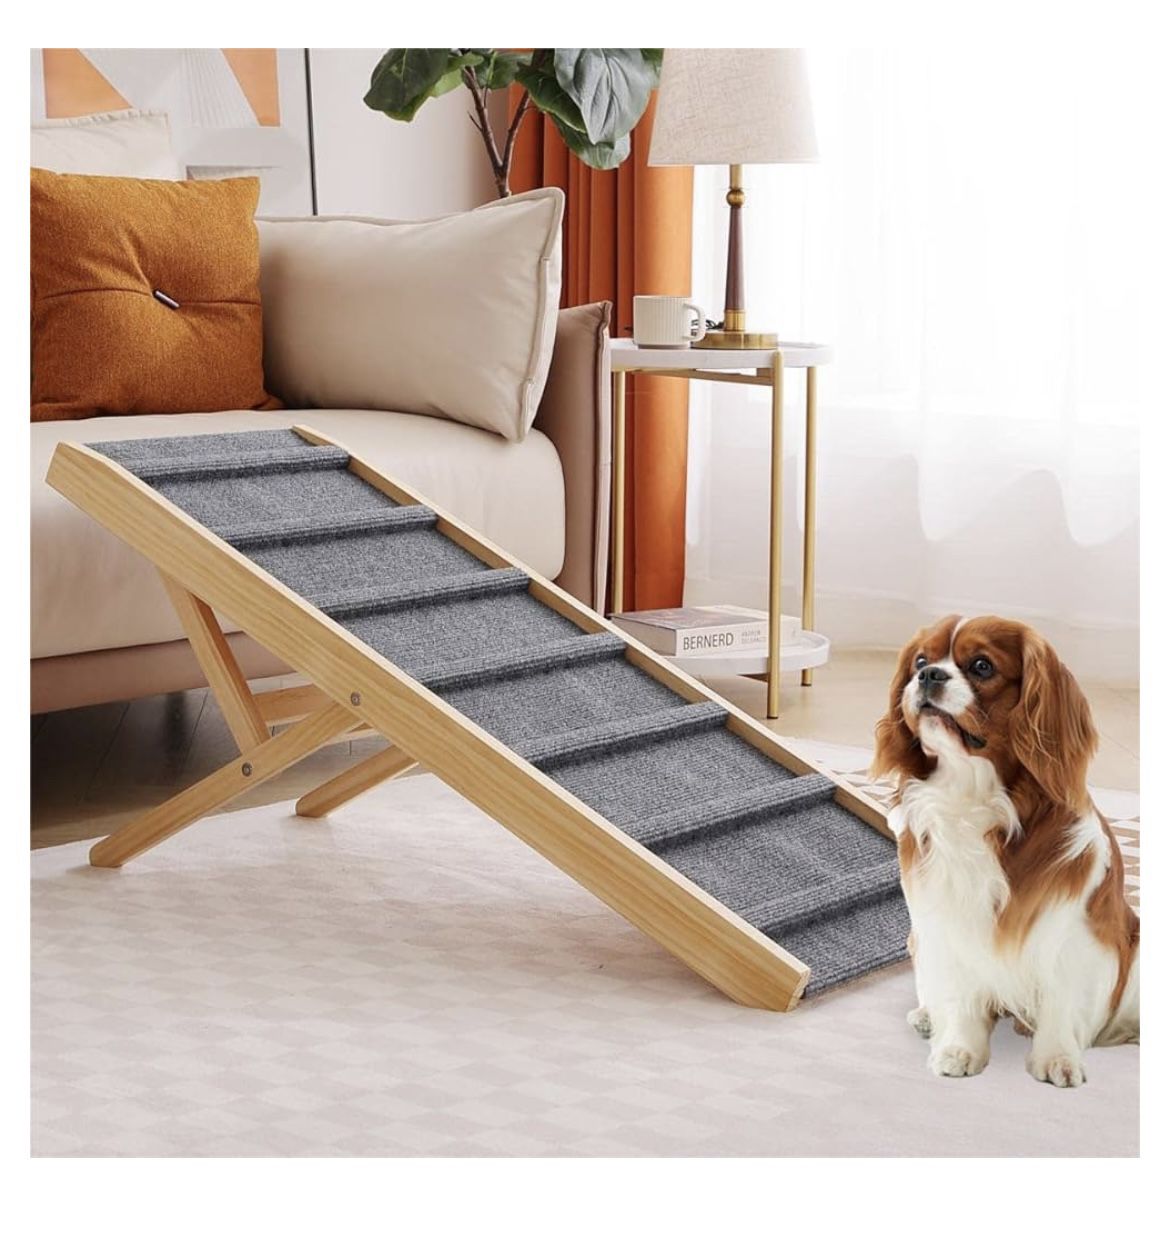 Large Dog Pet Ramp Stairs for Bed Car Truck Couch SUV,Dog Pet Ramp for Small Large Dogs Pets to Get on High Bed Truck Couch Sofa